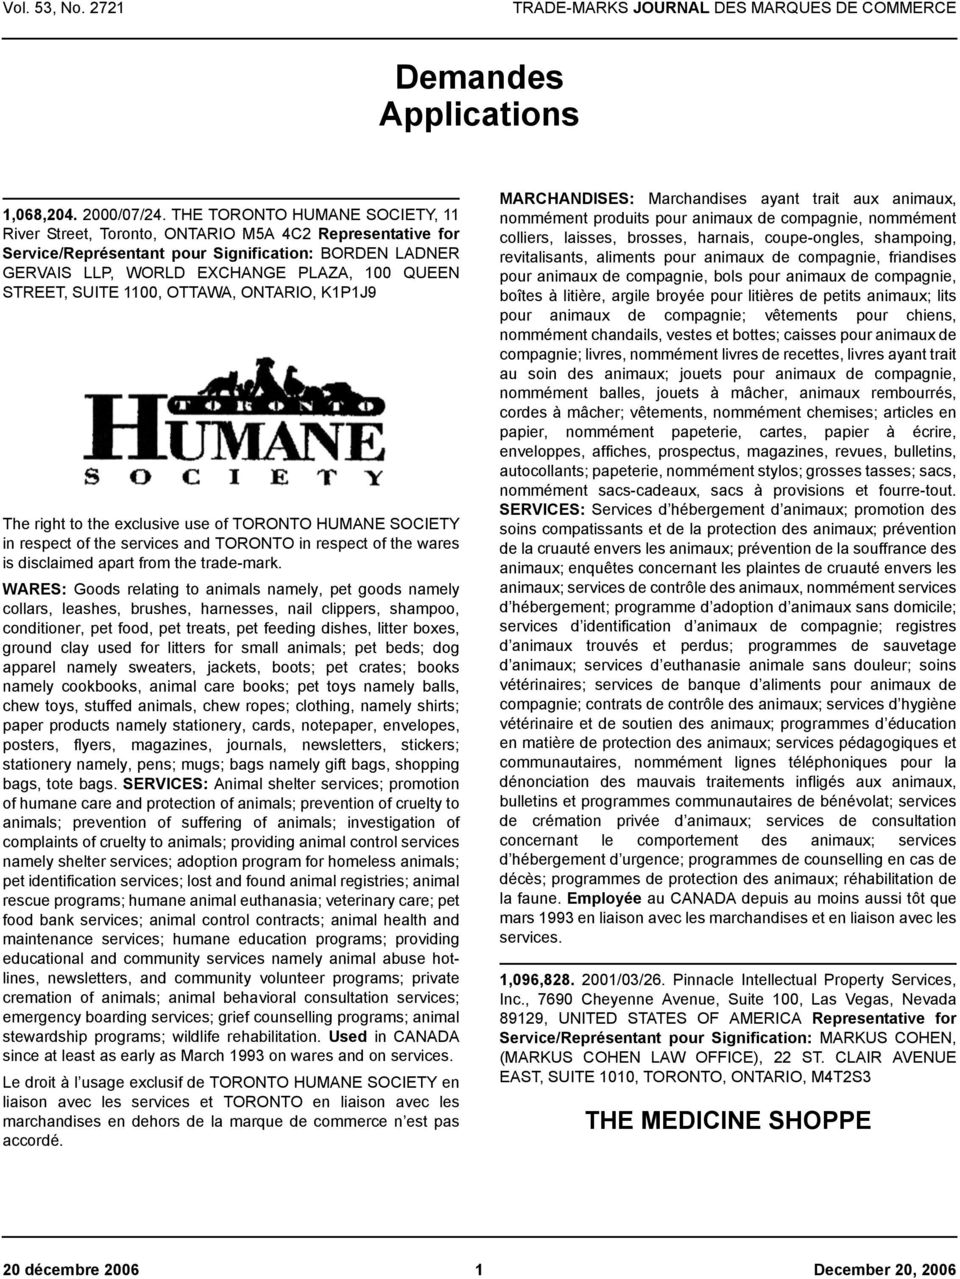 SUITE 1100, OTTAWA, ONTARIO, K1P1J9 The right to the exclusive use of TORONTO HUMANE SOCIETY in respect of the services and TORONTO in respect of the wares is disclaimed apart from the trade-mark.